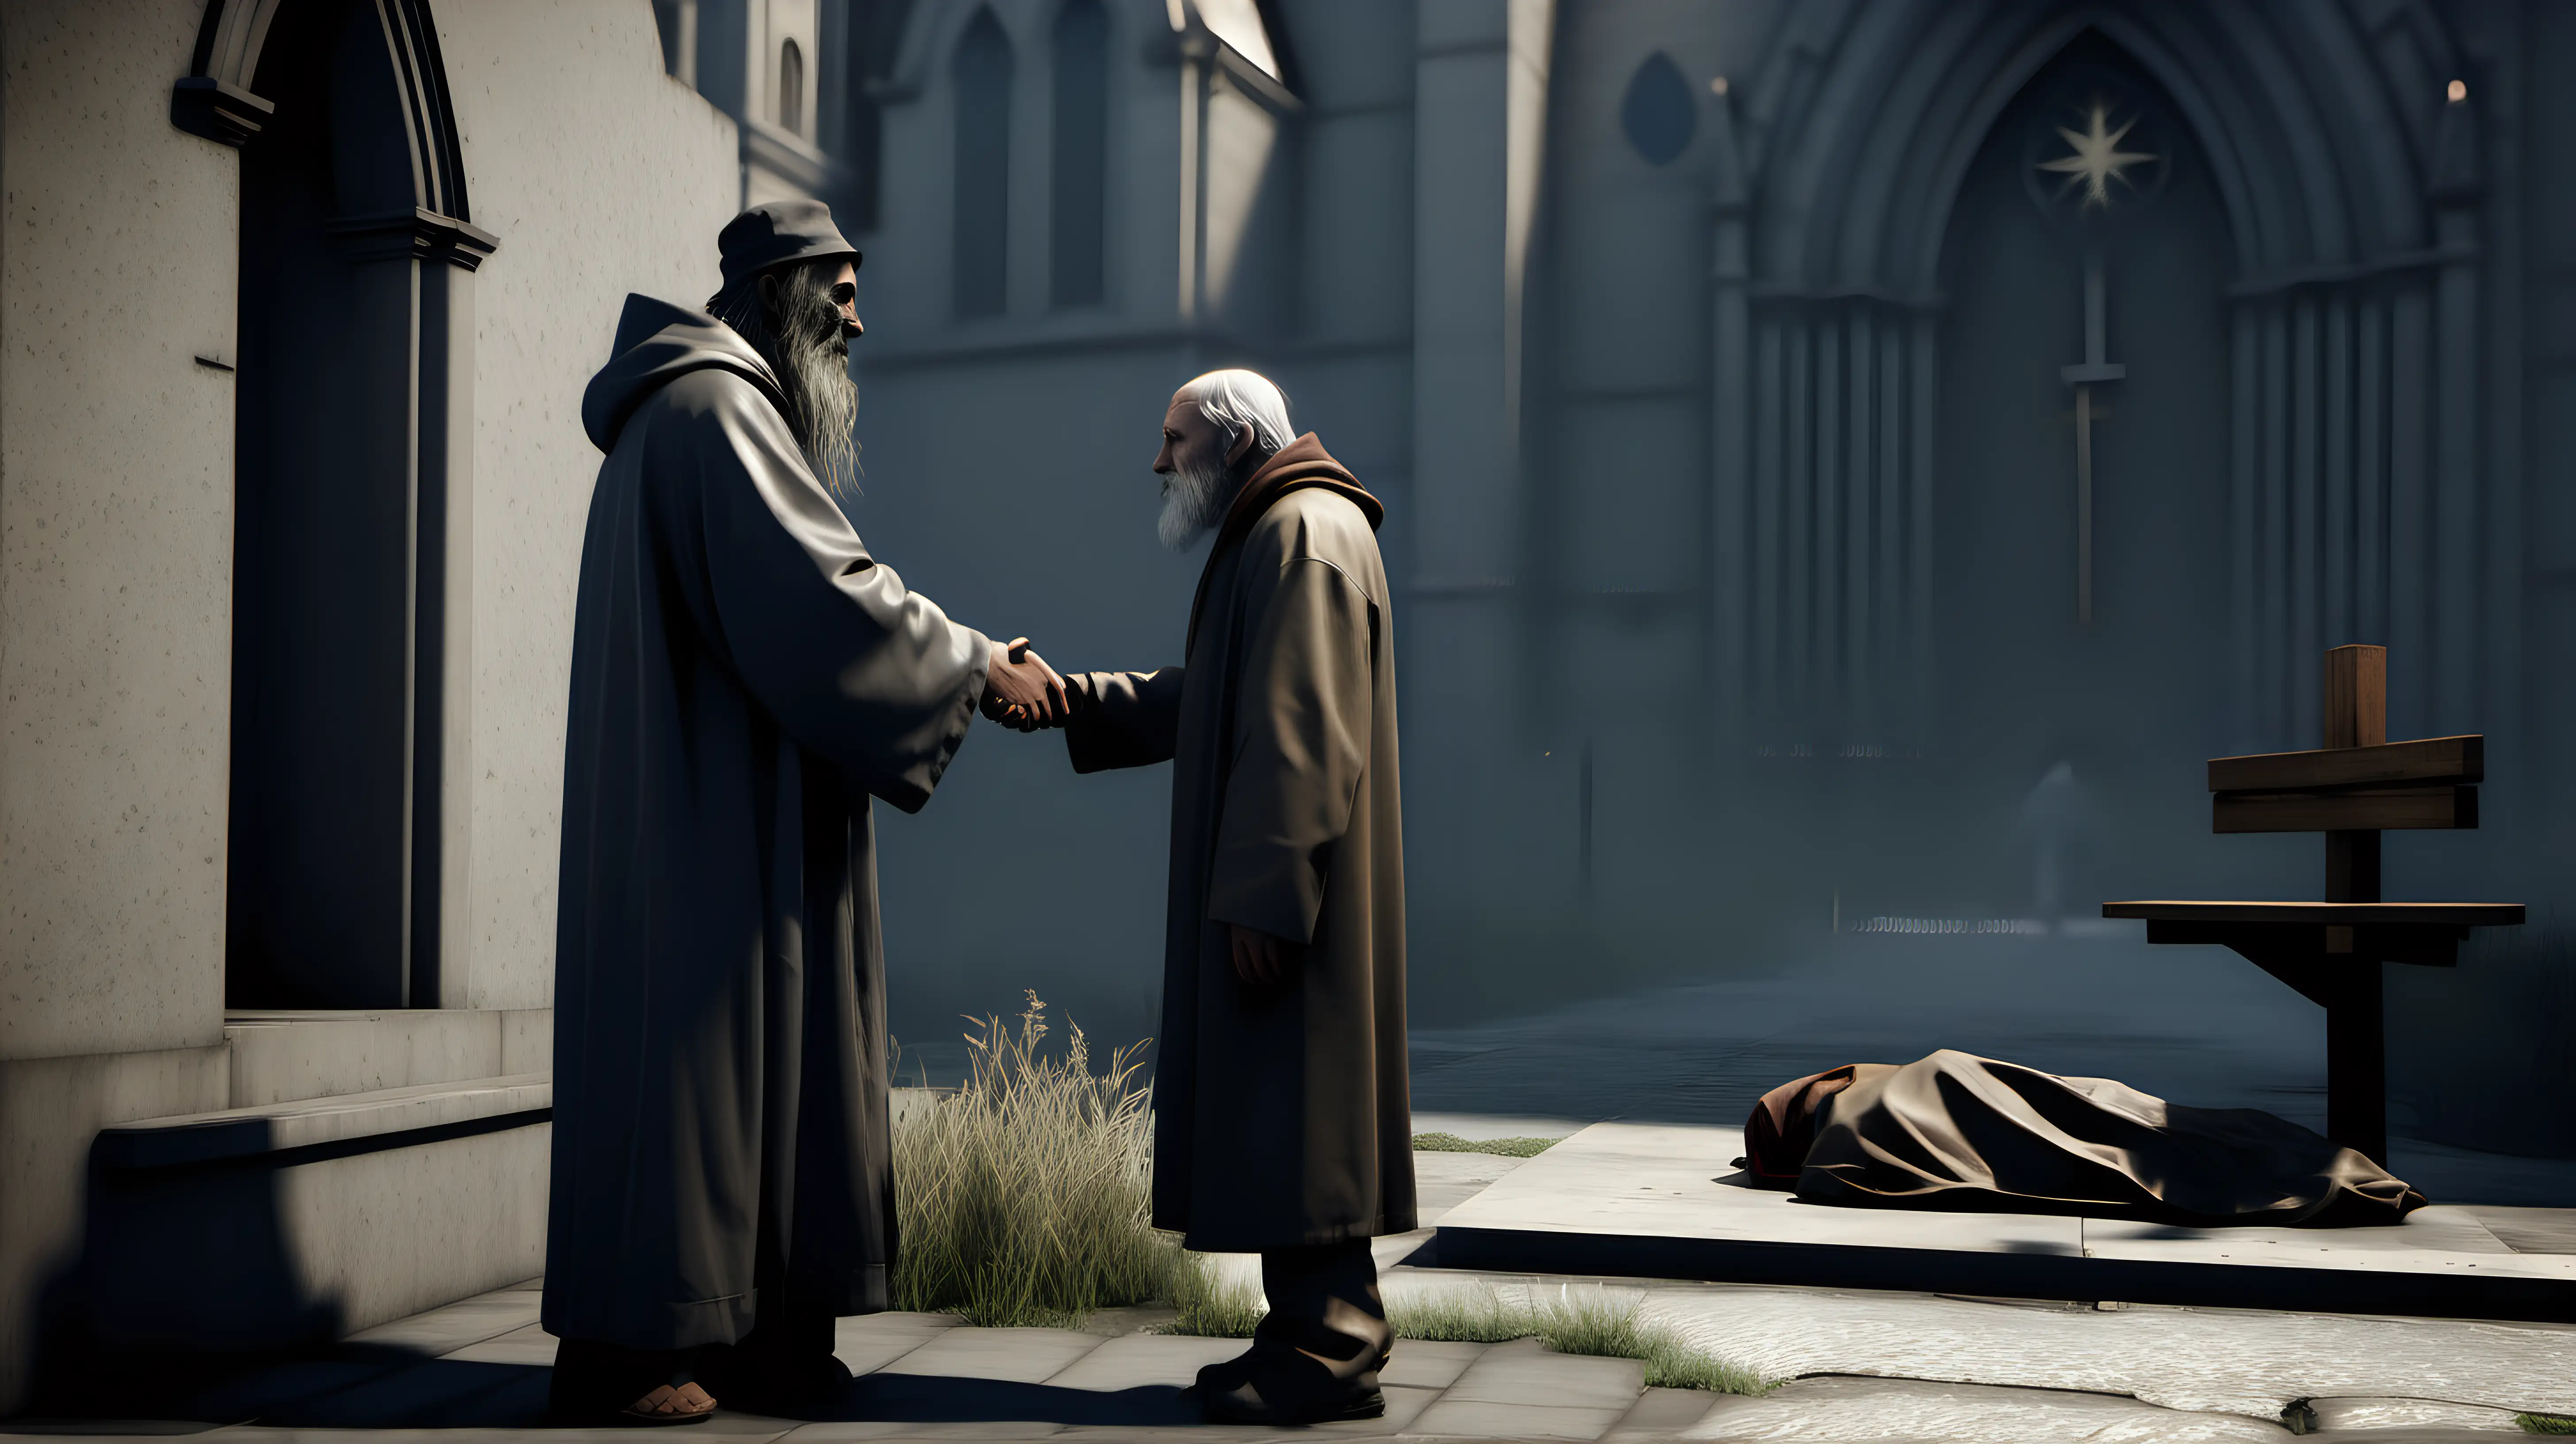 Heartwarming Encounter Priest Extends Helping Hand to Homeless Man Outside Church